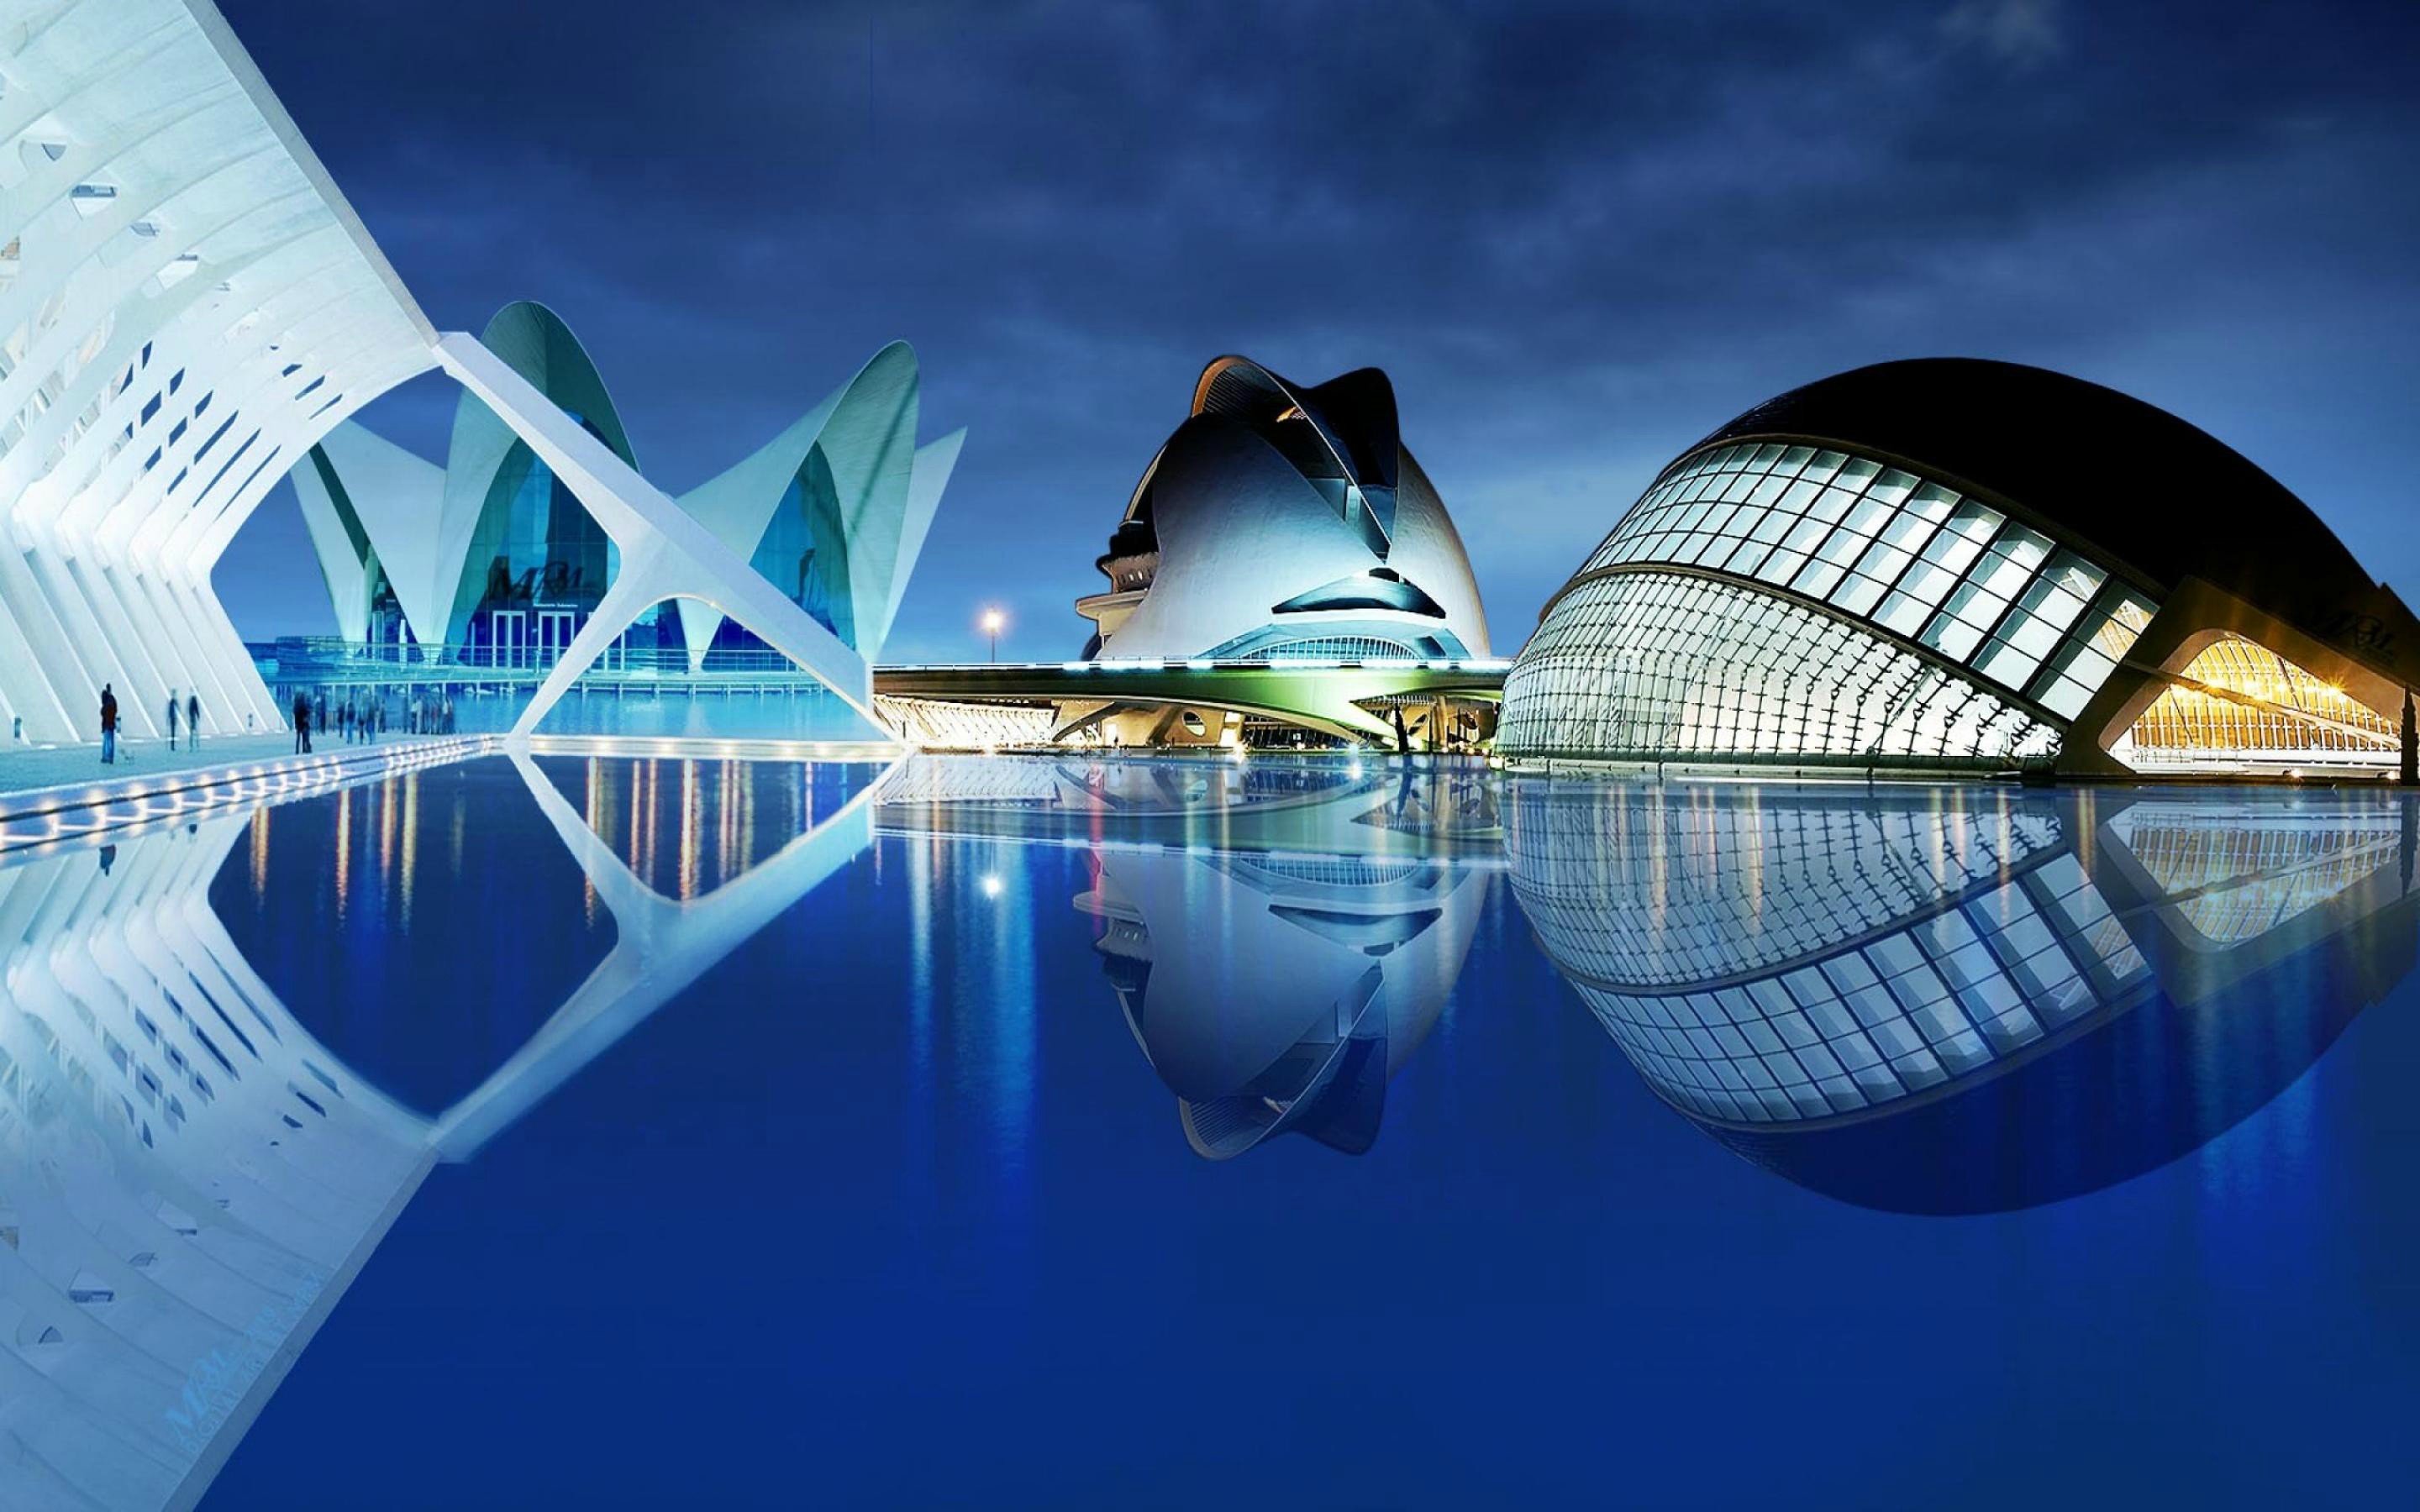 Man Made Valencia HD Wallpaper | Background Image